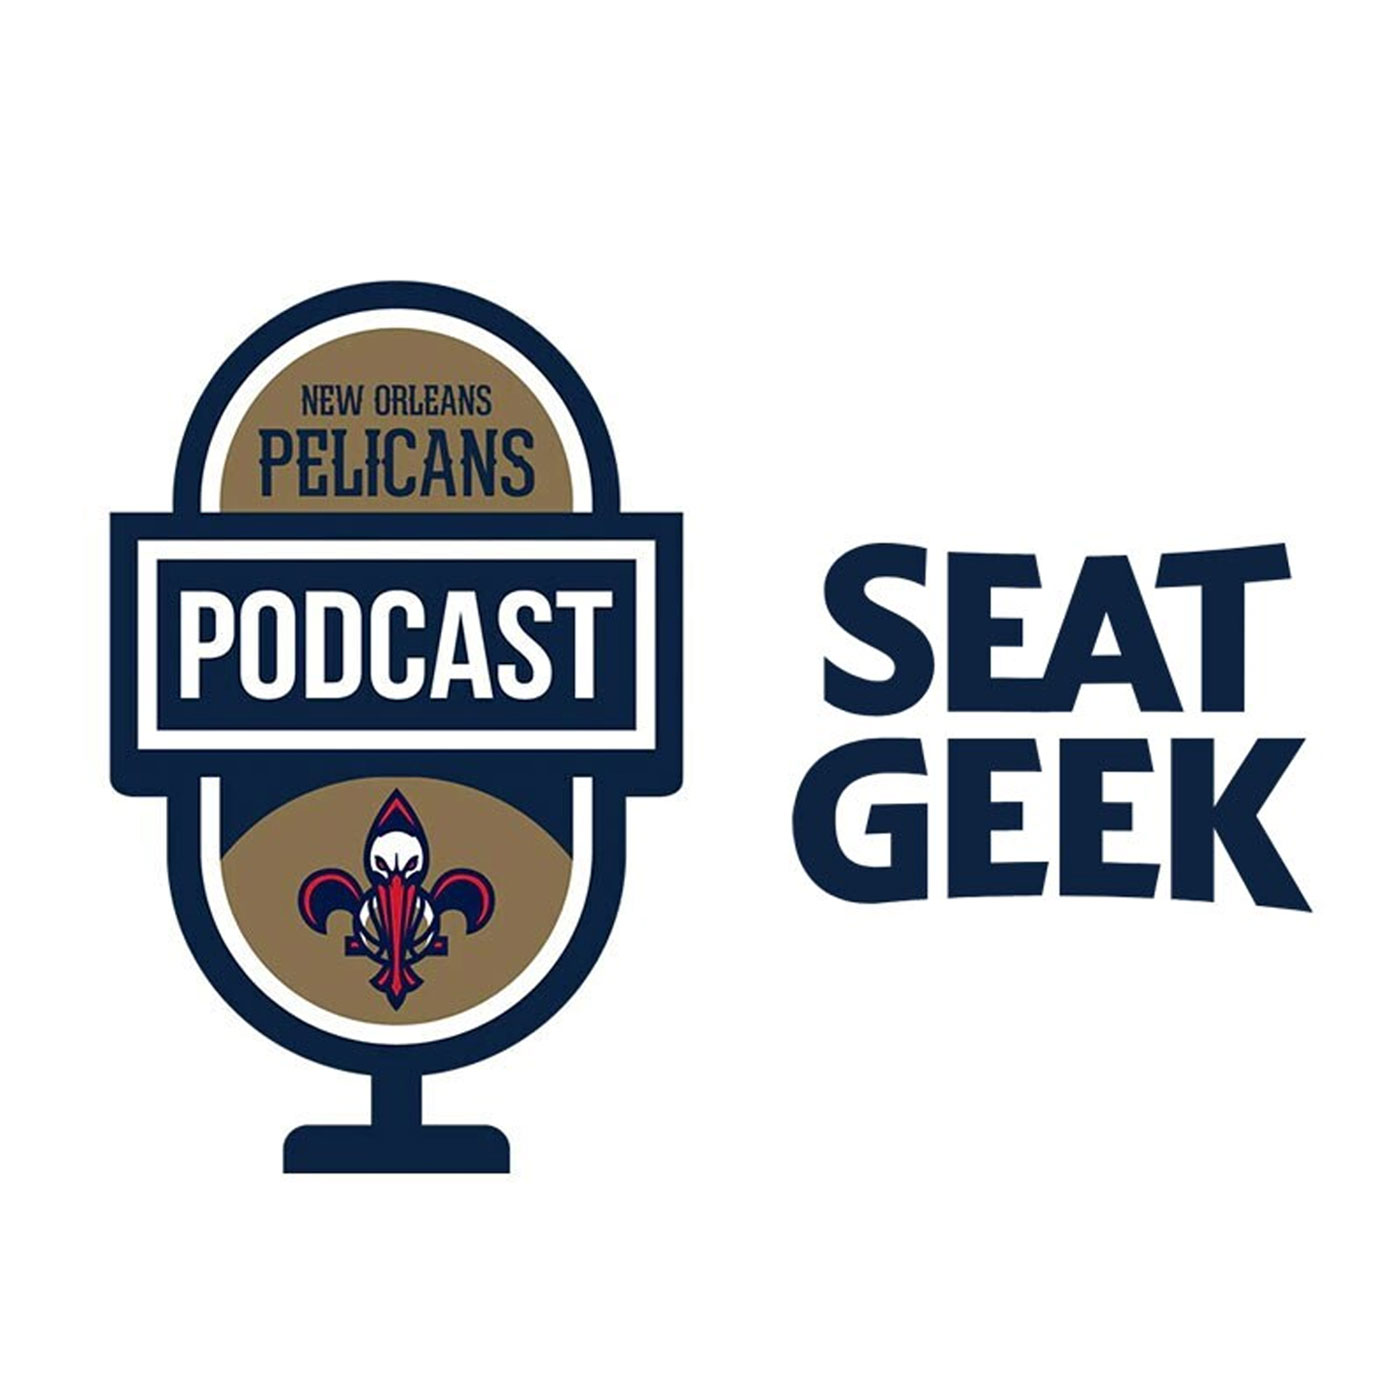 2021 Draft Preview - No 2; Craig Ackerman on the New Orleans Pelicans podcast presented by SeatGeek - July 20, 2020